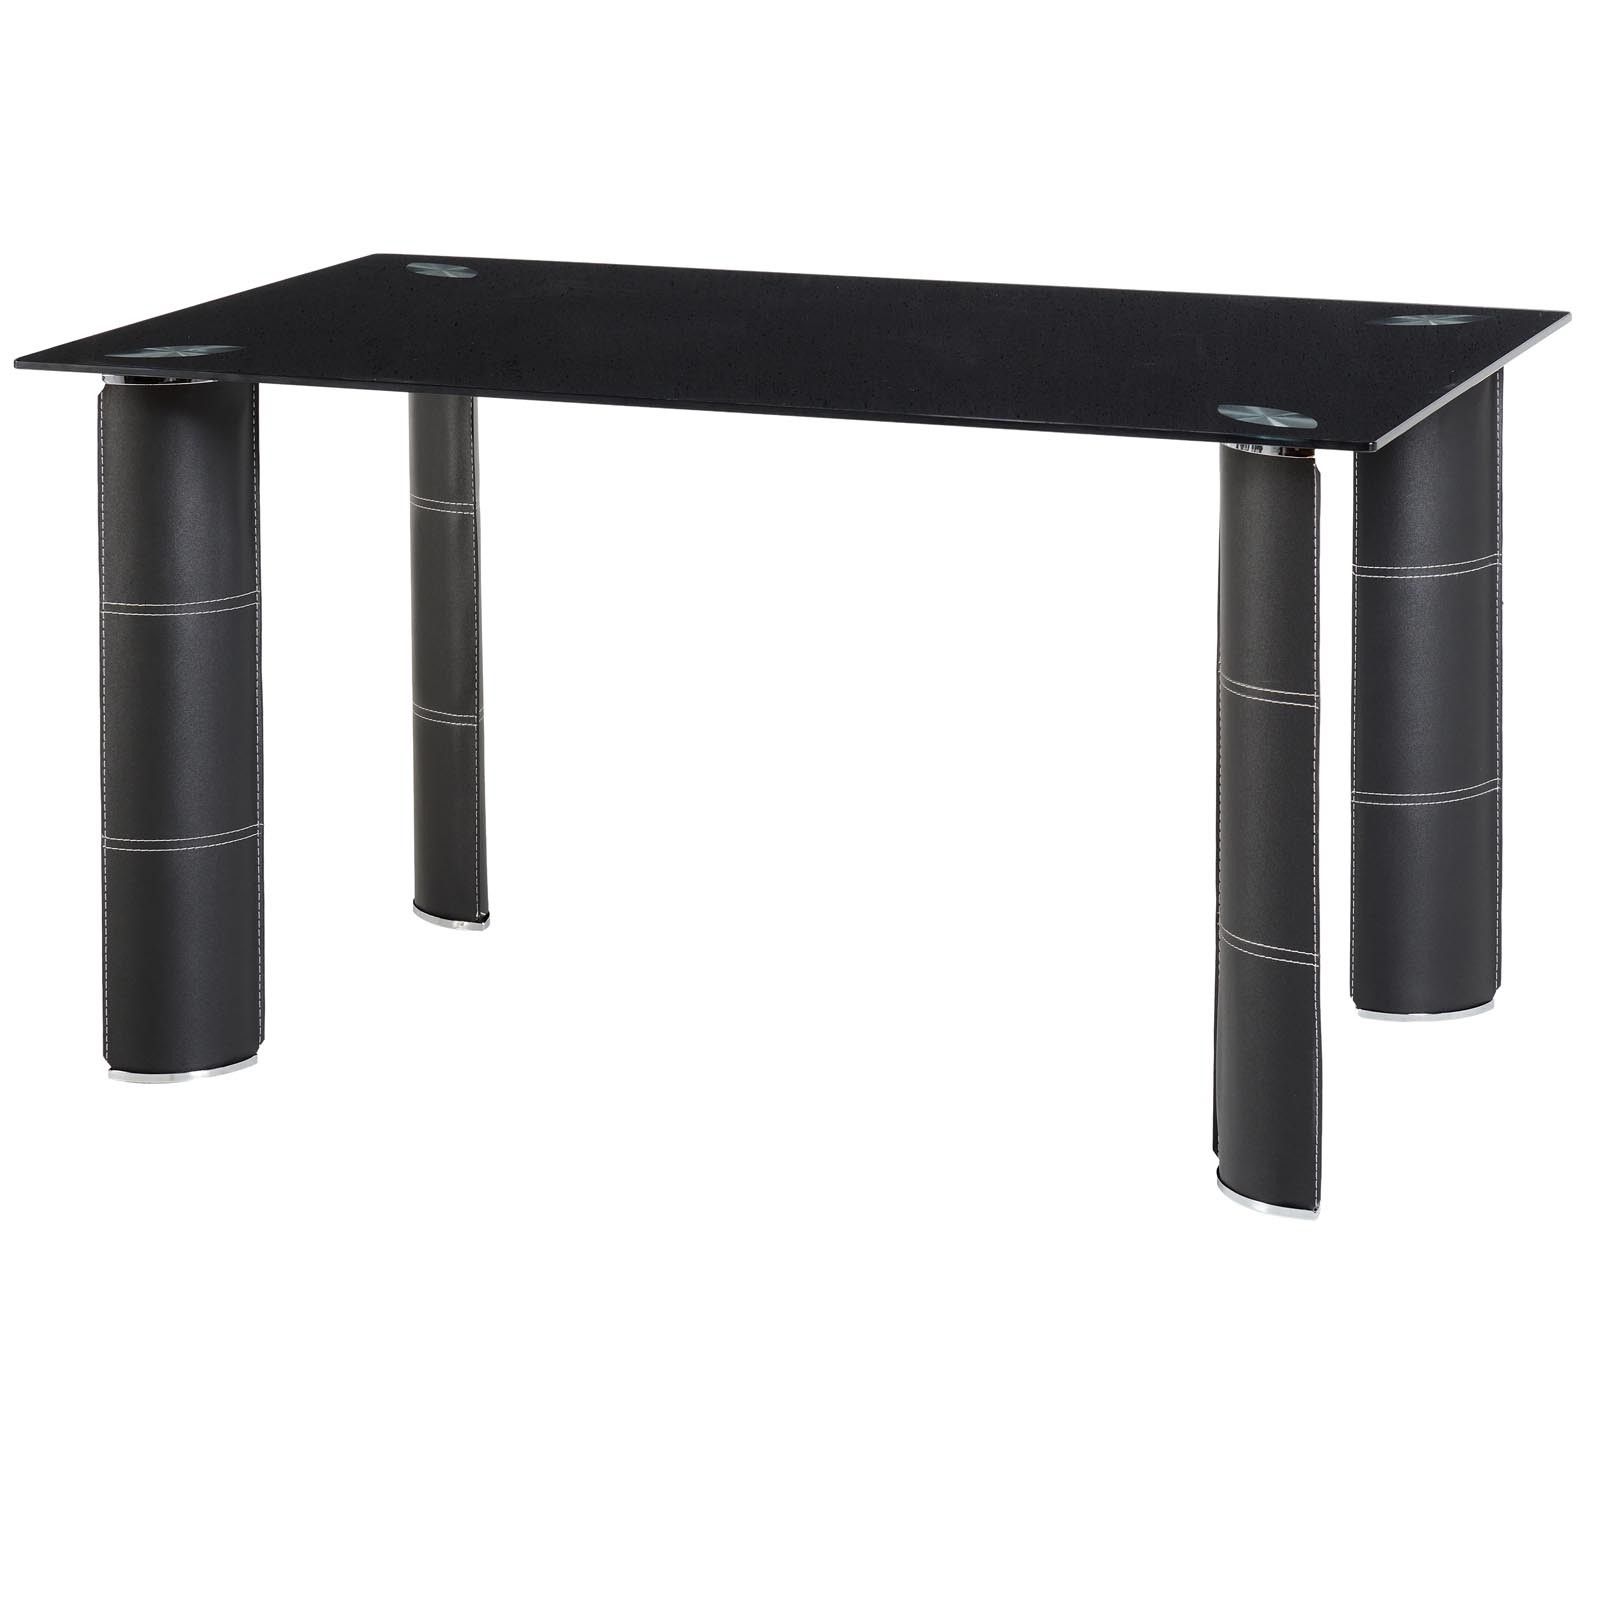 Amazing Prices | Seconique Bradford Dining Table | Fast Free Delivery Throughout Best And Newest Bradford Dining Tables (View 19 of 20)